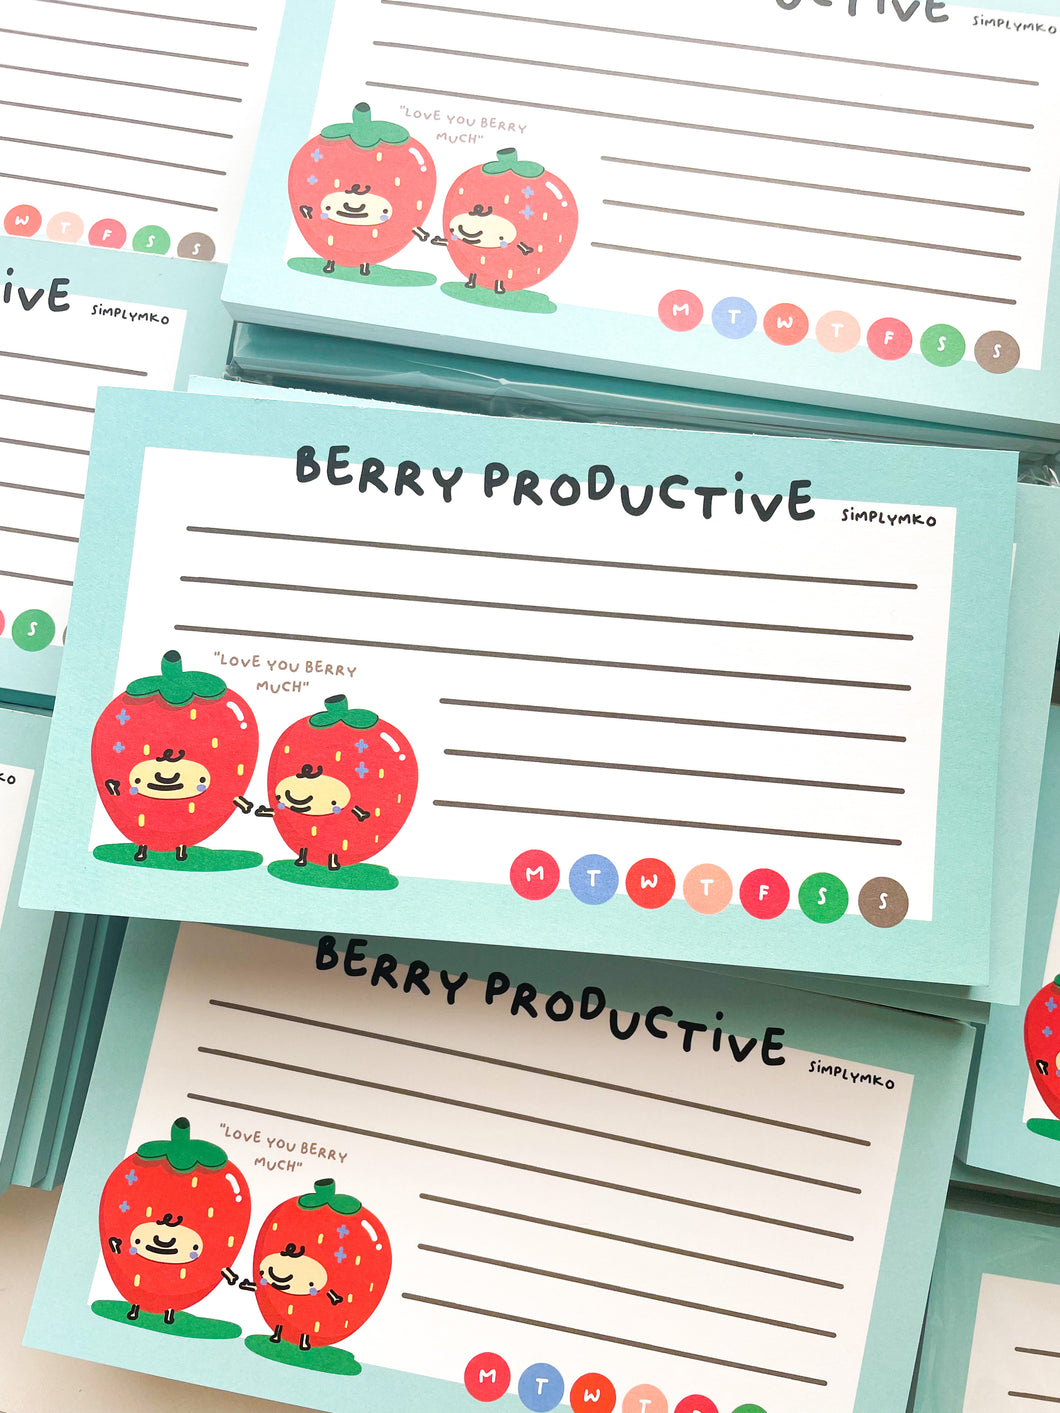 Berry Productive Notepad